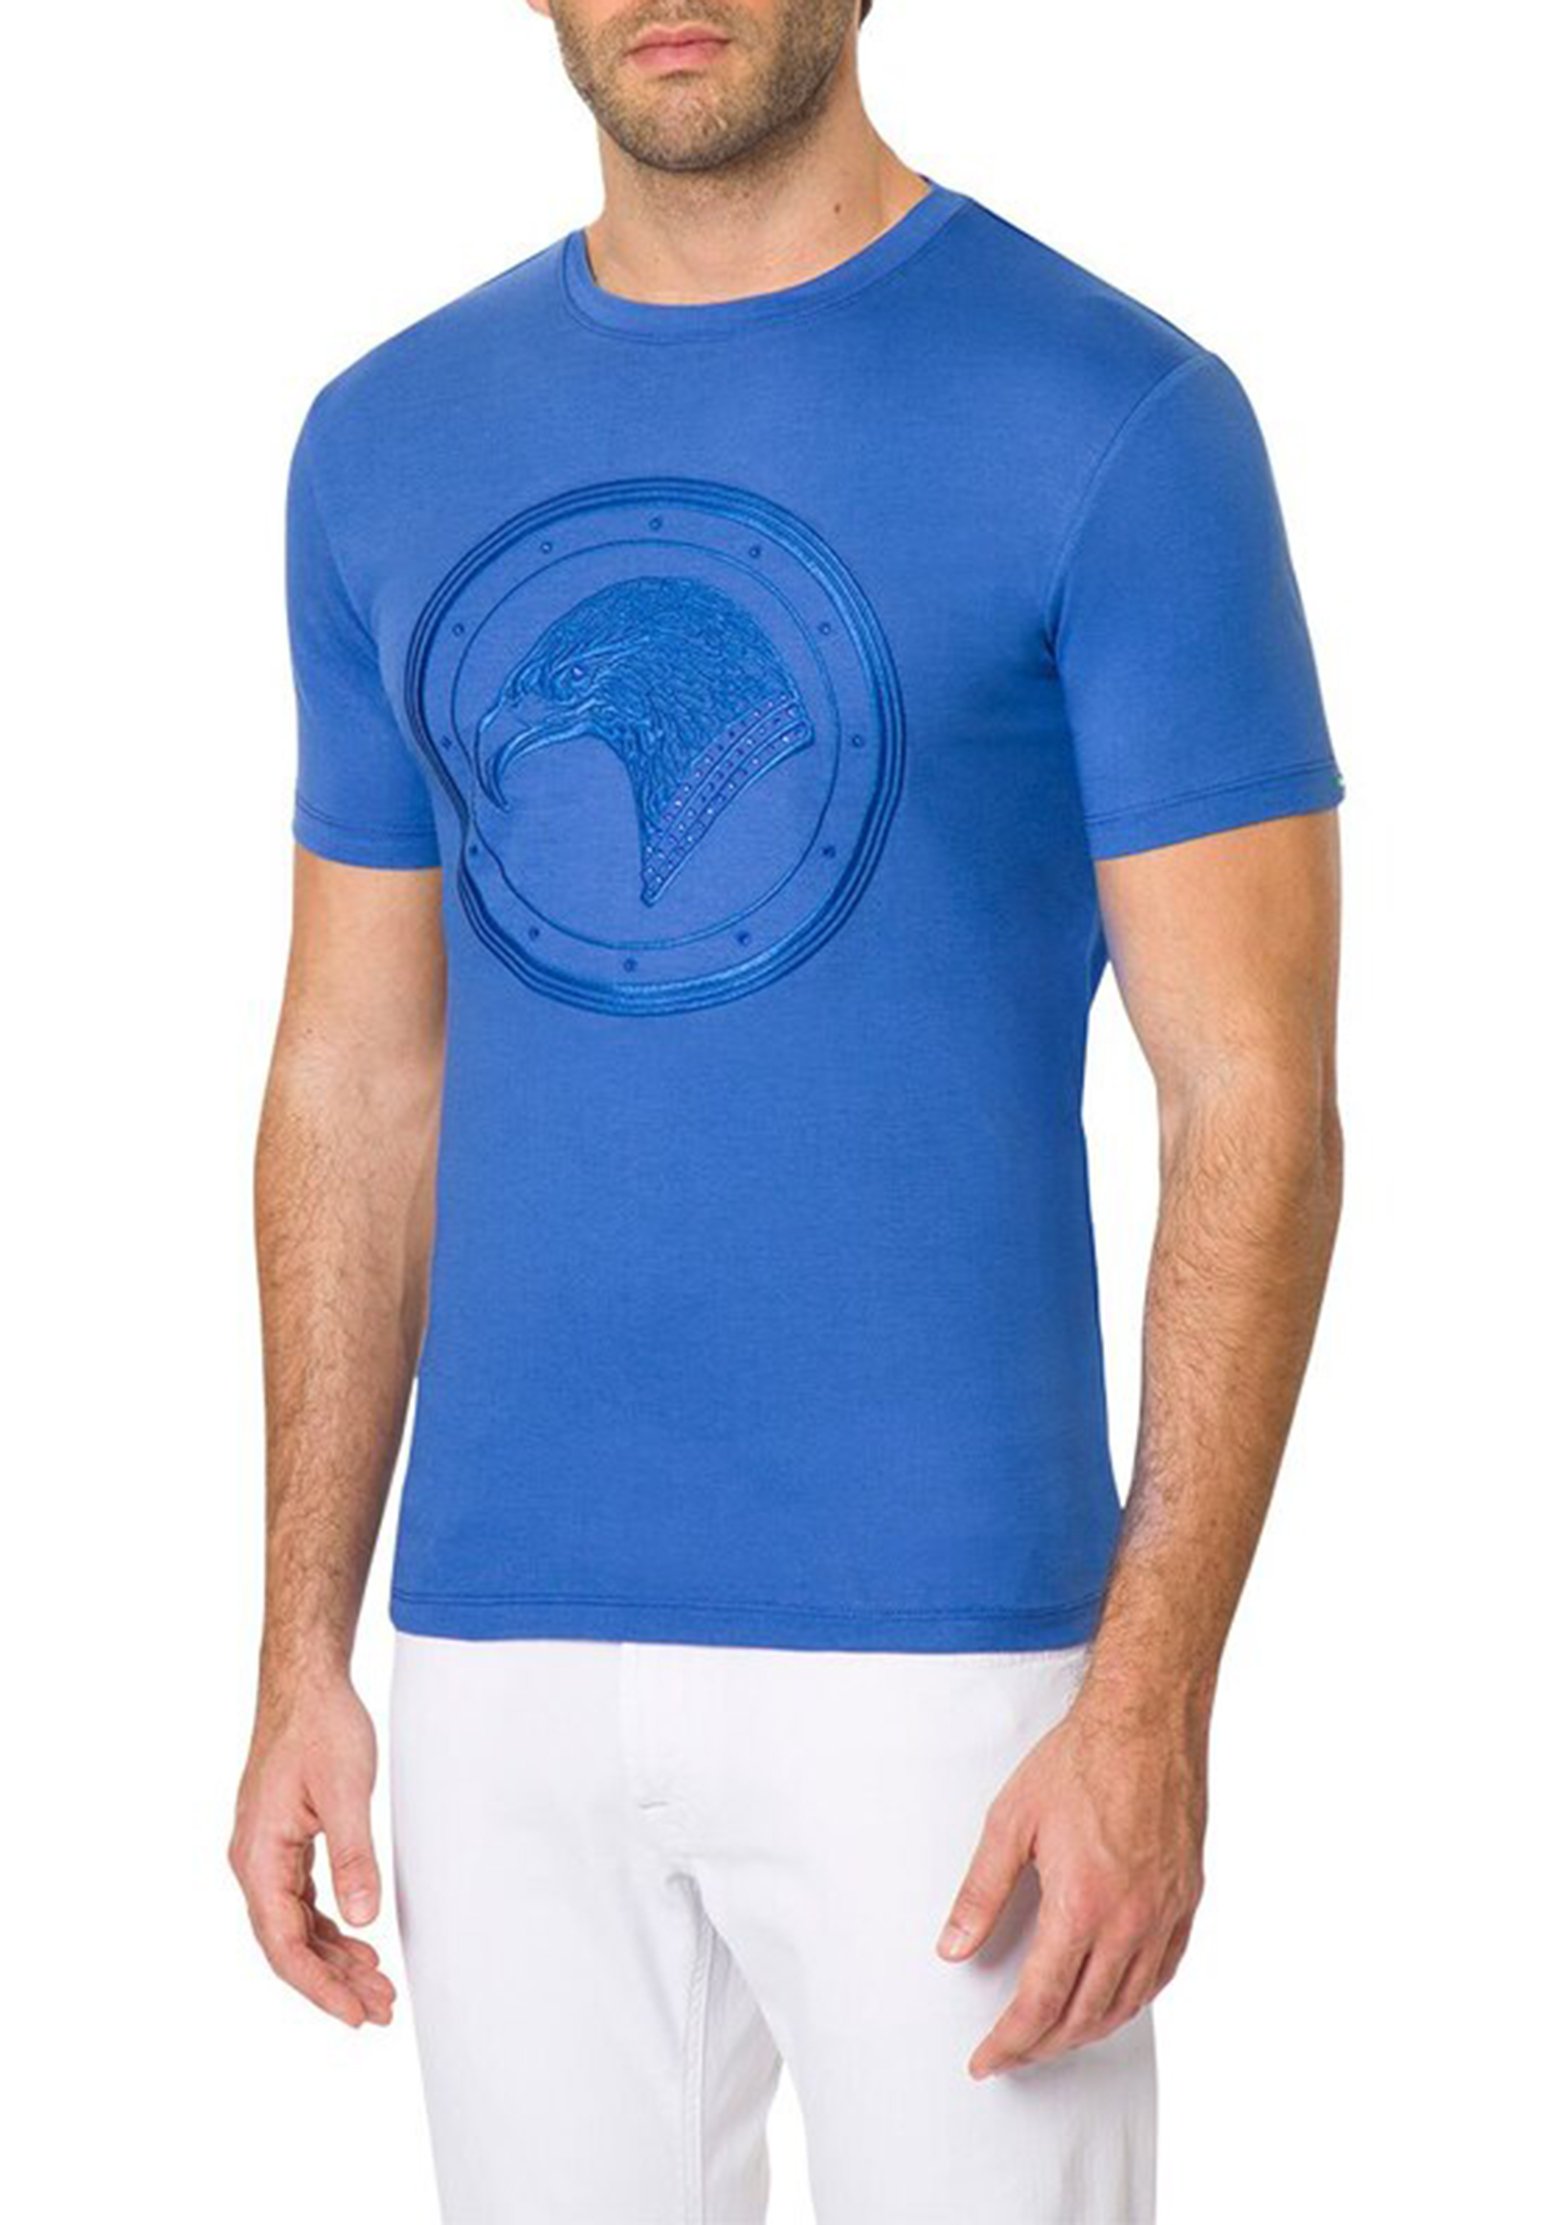 T-Shirt STEFANO RICCI Color: blue (Code: 649) in online store Allure